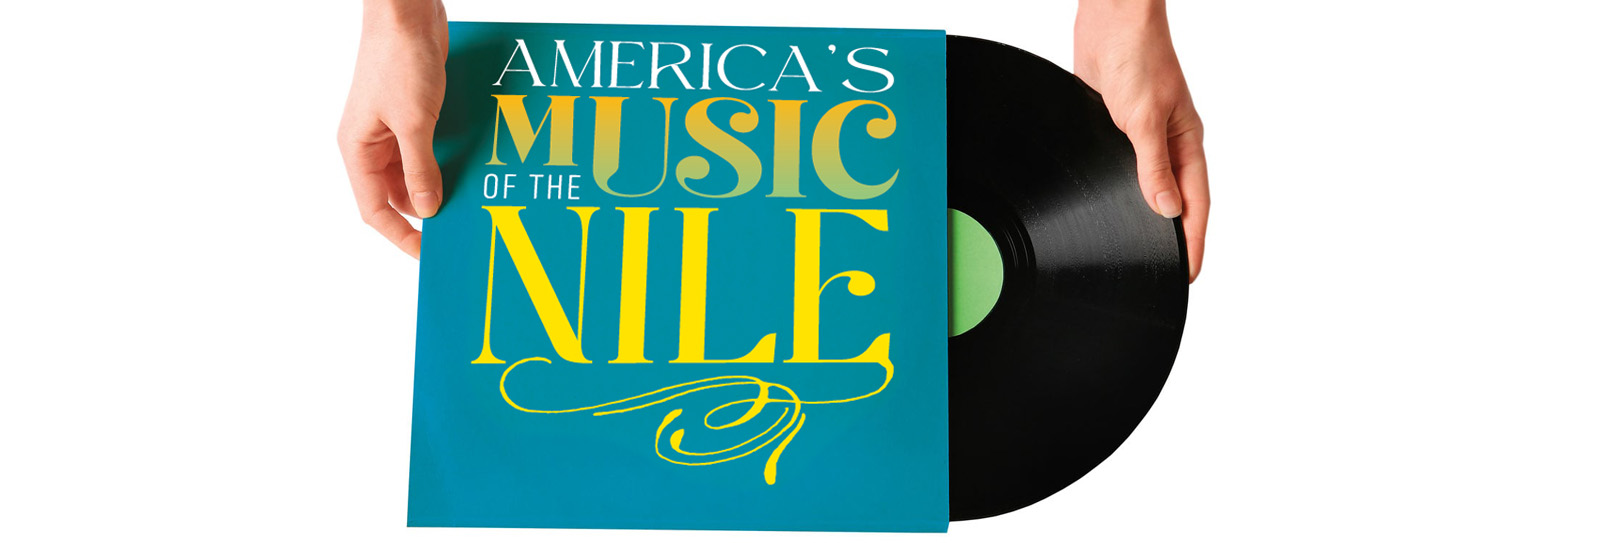 America's Music of the Nile